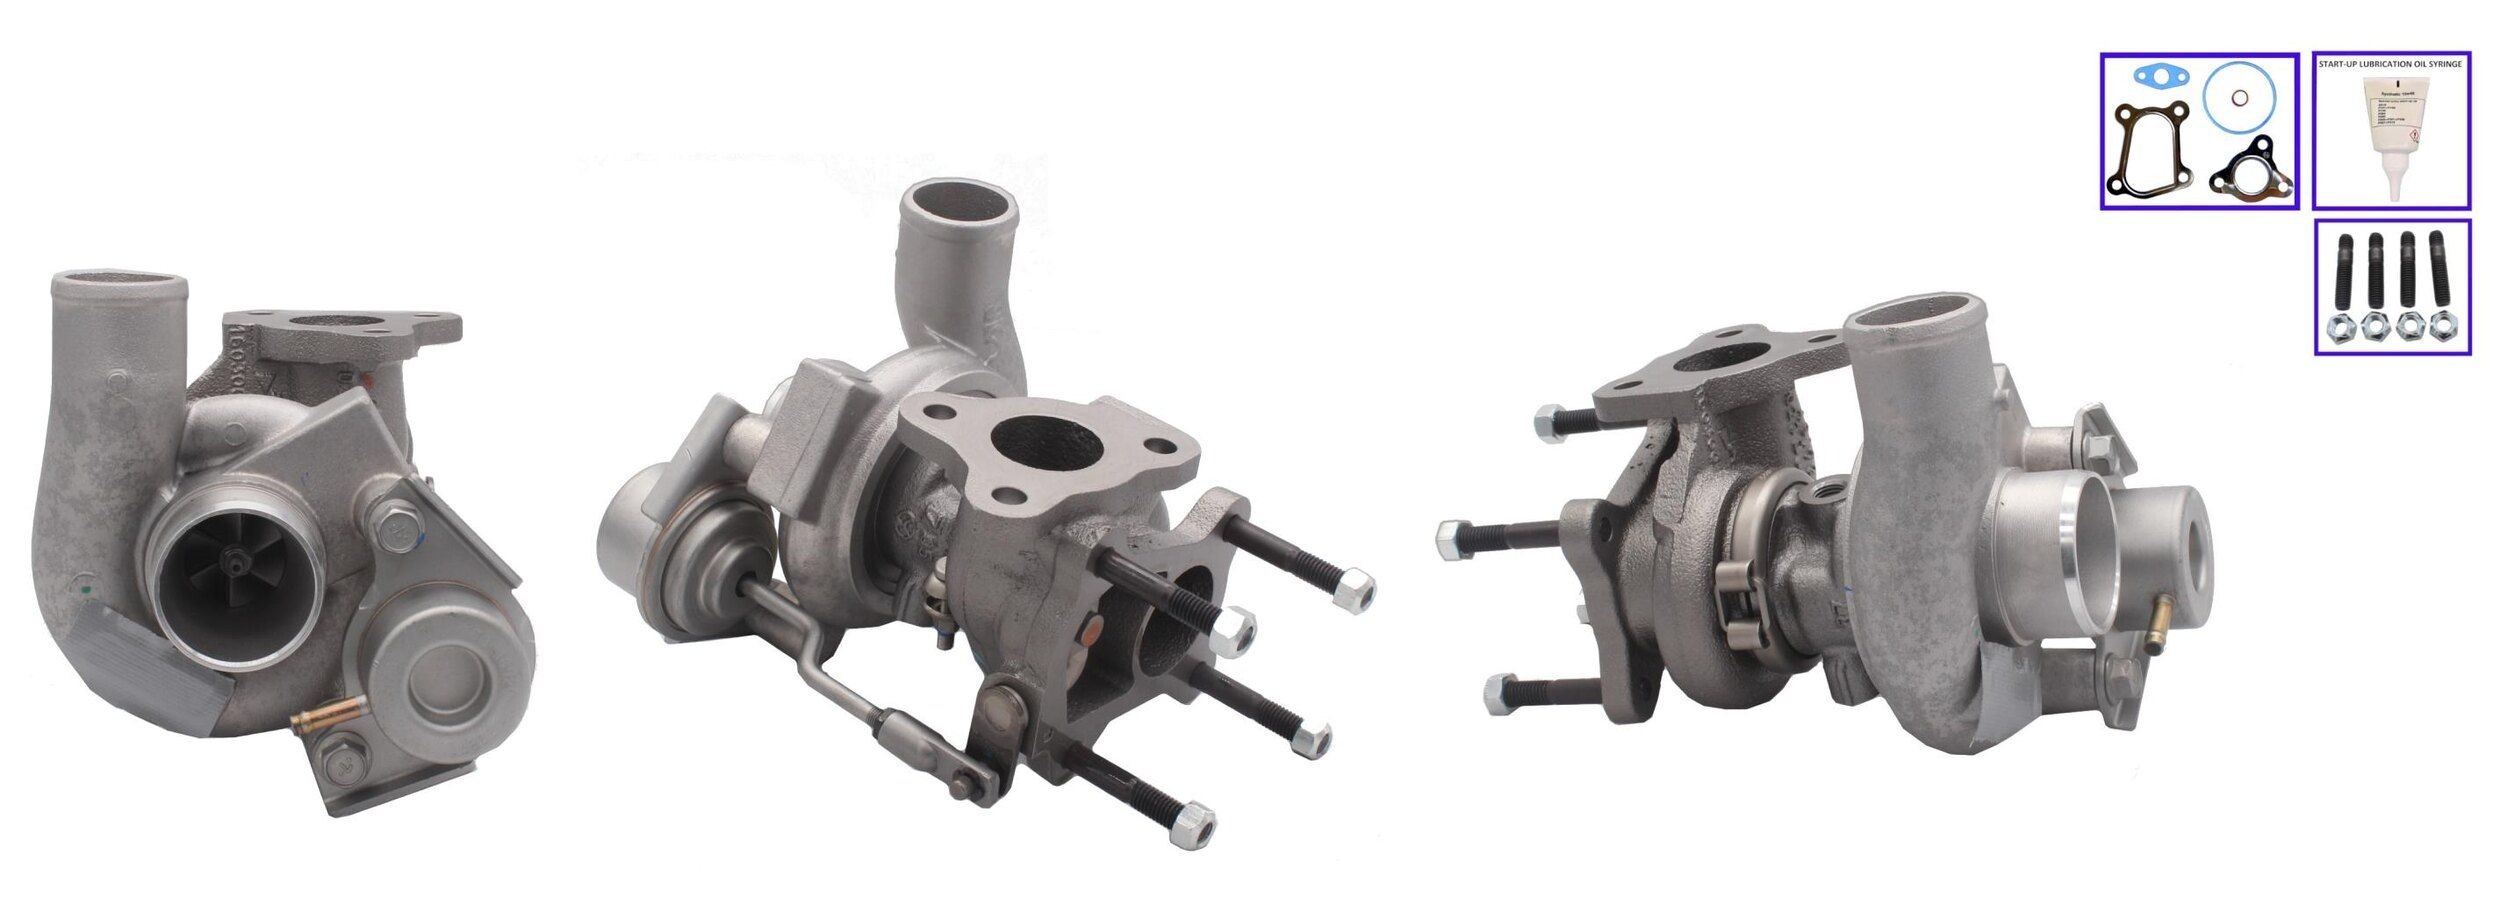 TURBO MOTOR PA4917306500 Turbocharger Exhaust Turbocharger, Pneumatically controlled actuator, with gaskets/seals